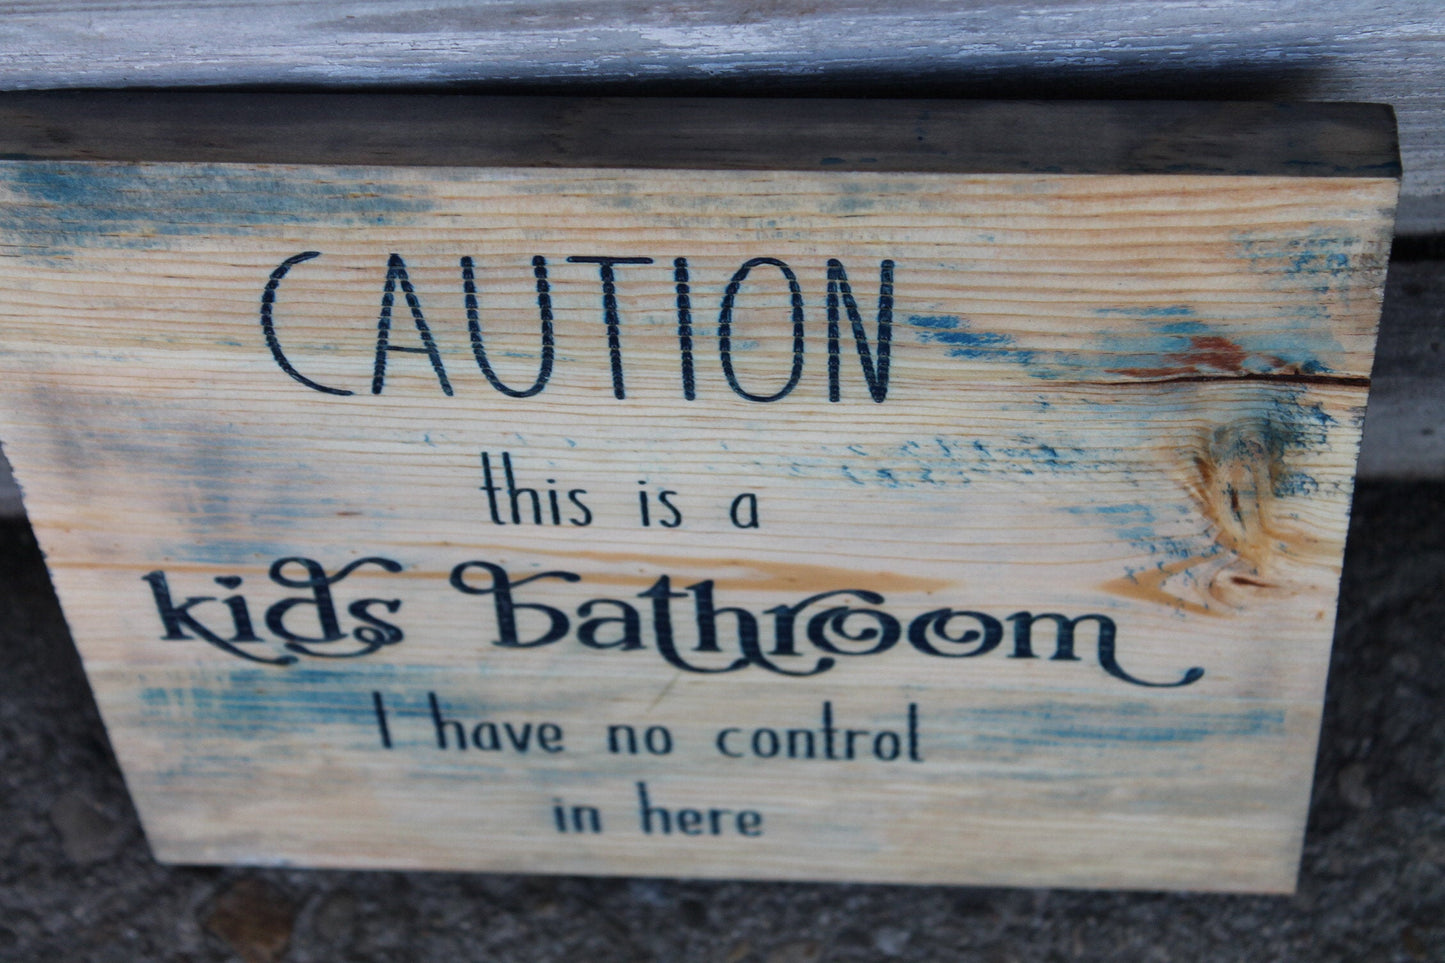 Funny, Kids Bathroom, Sign,  Spare Bath, Caution This is a Kids Bathroom I have no Control in Here, Engraved, Rustic, Wood, Gross, Joke